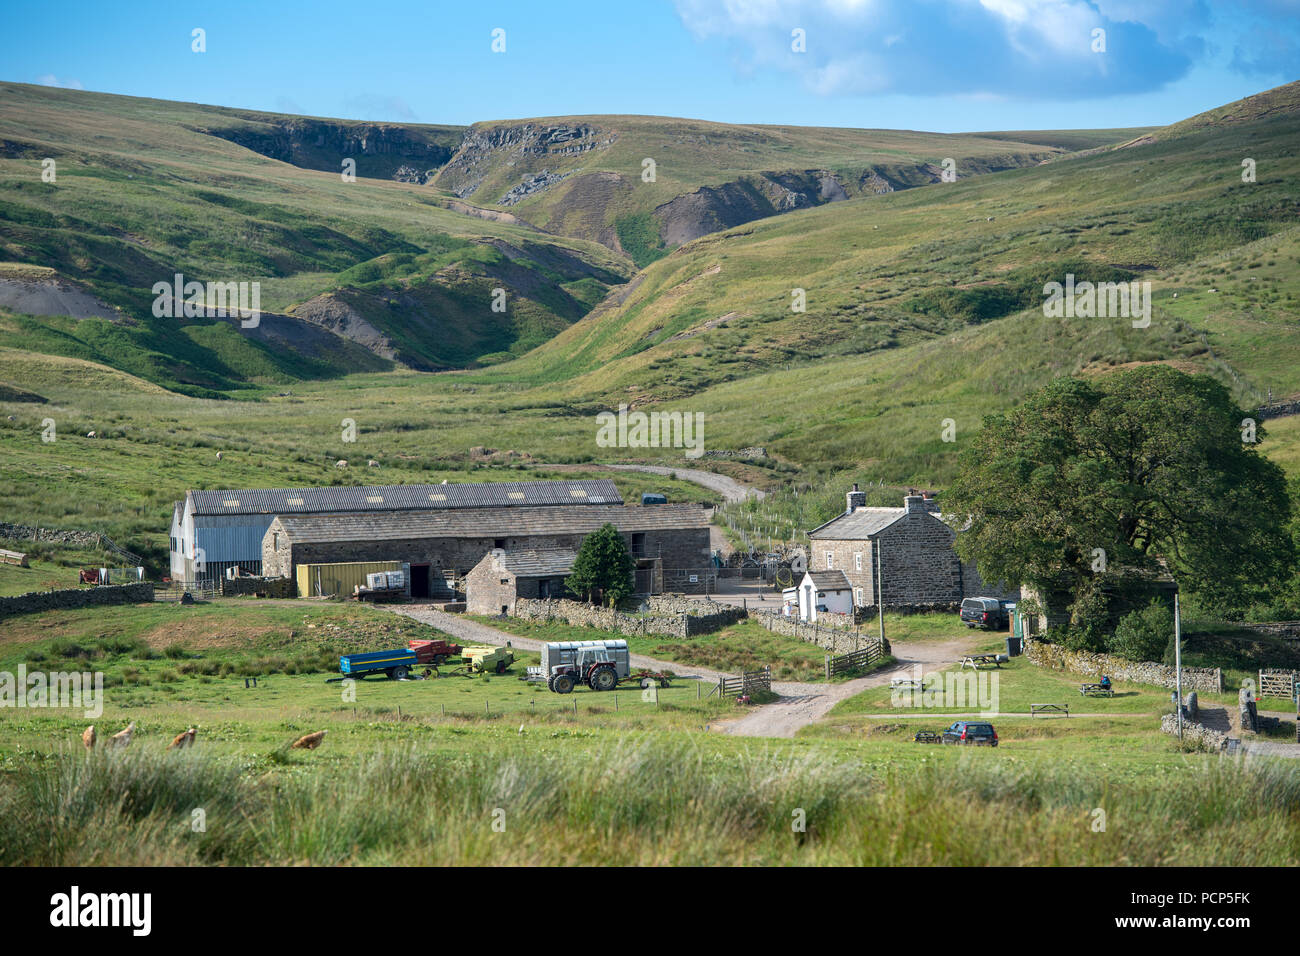 Ravenseat, a remote hill farm at the top end of Swaledale, Yorkshire Dales National Park, UK. Stock Photo